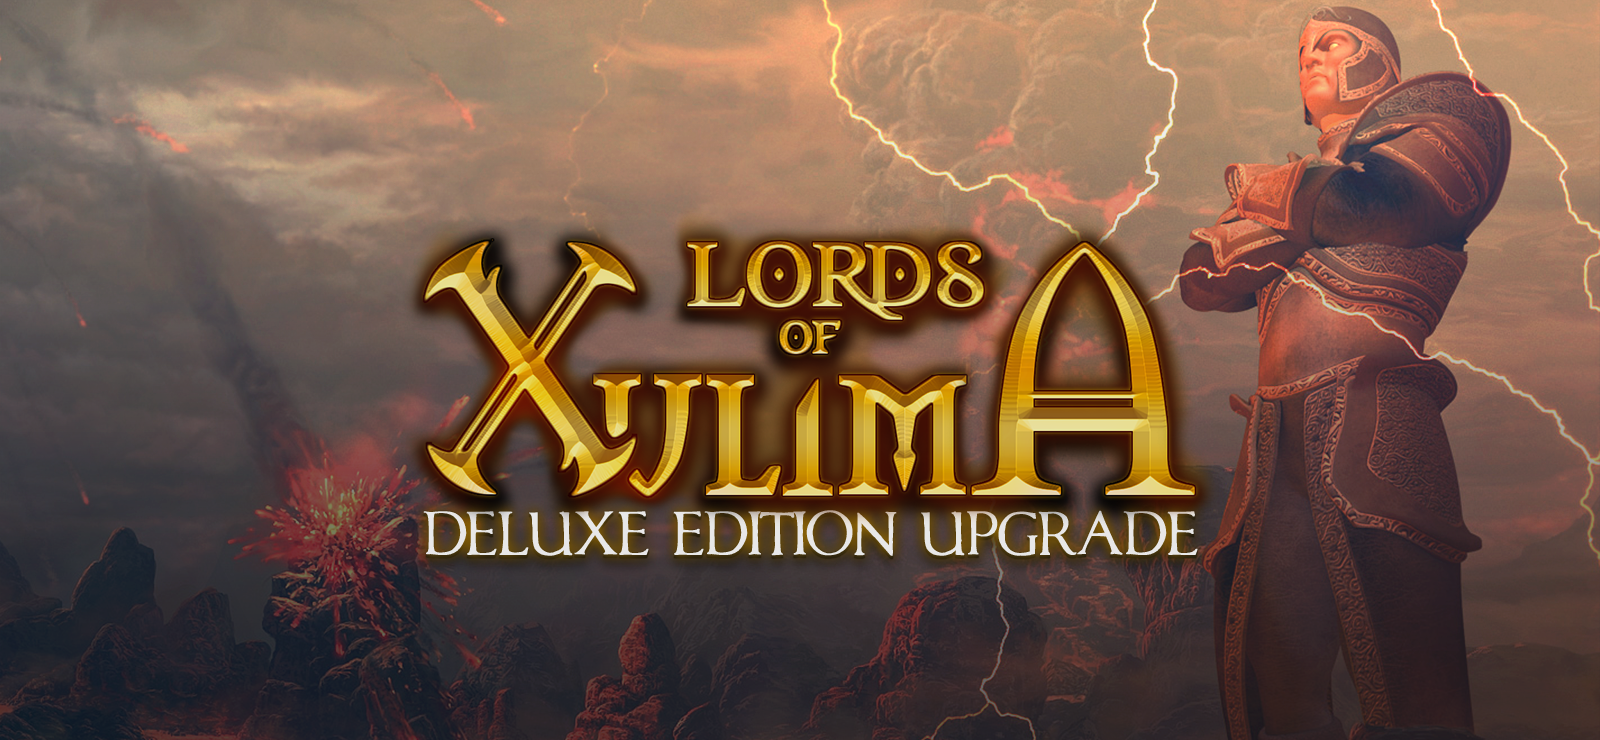 Lords Of Xulima Deluxe Edition Upgrade